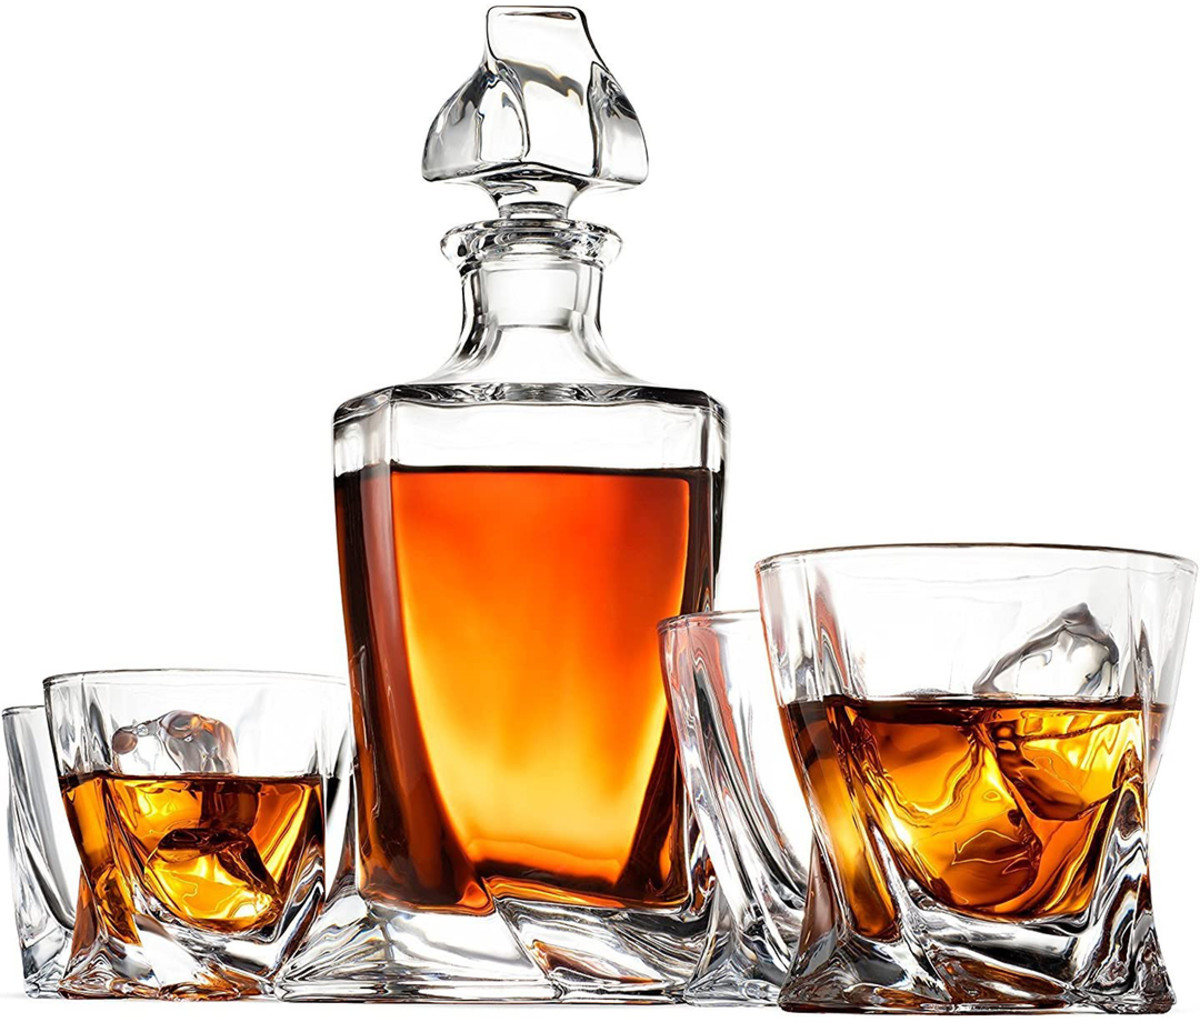 Gift Someone This Gorgeous Whiskey Decanter Set For Their Home Bar - Men's  Journal